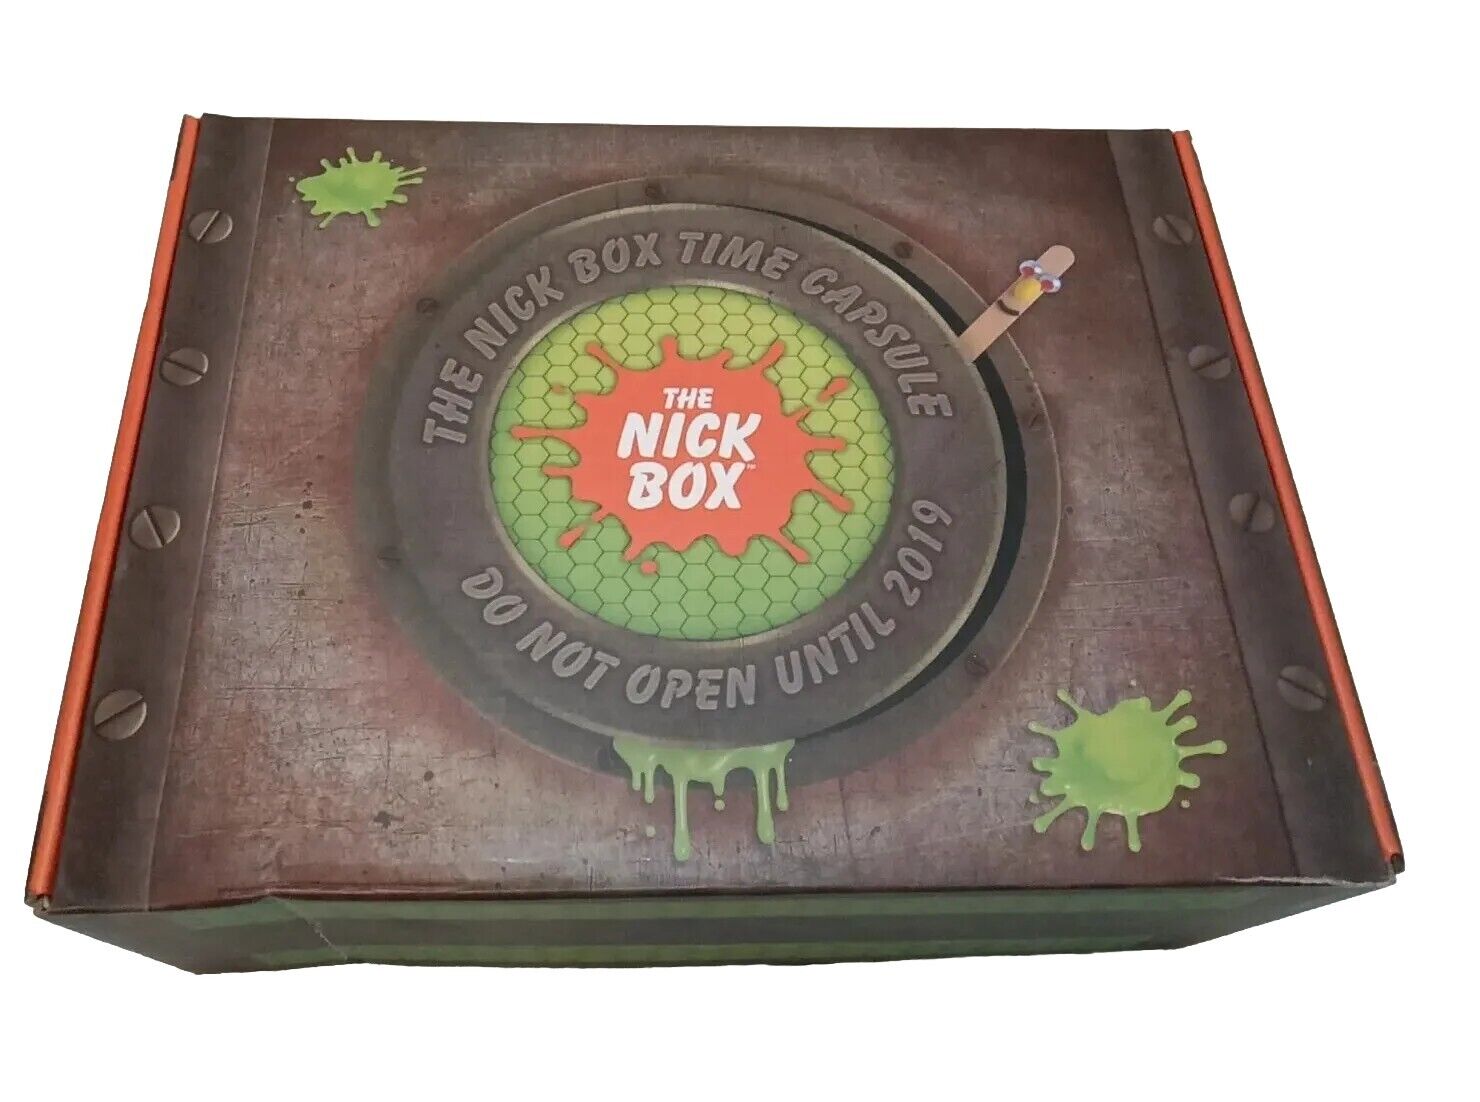 The Nick Box Spring 2019 With Box and Size M shirt Coasters Key Chain Glass